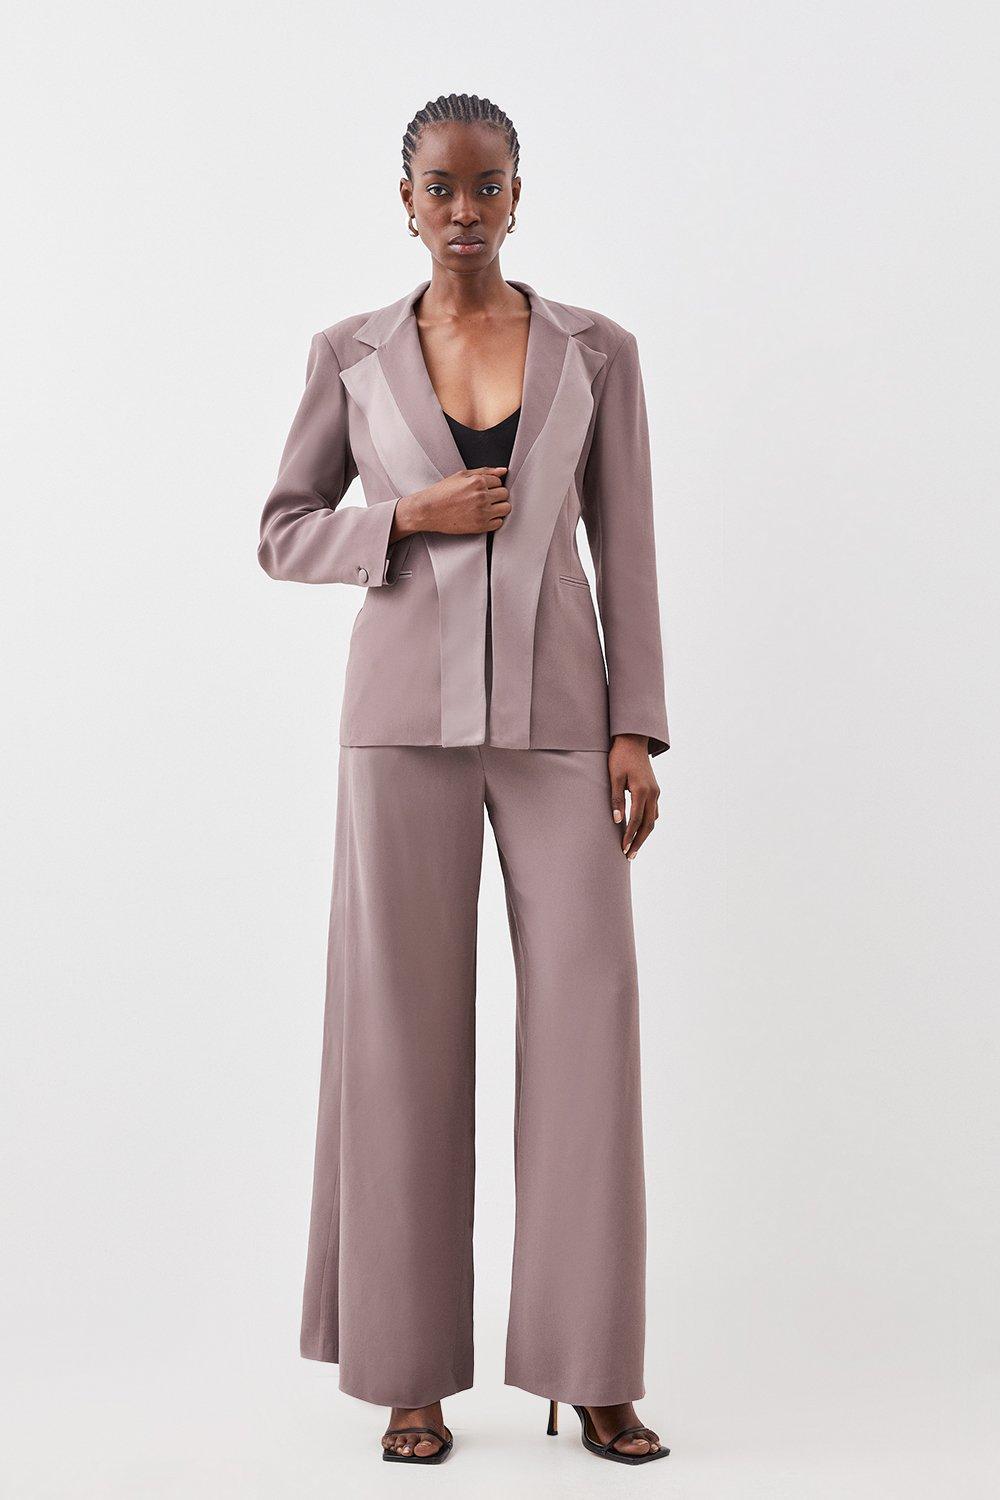 8 Floaty and Elegant Mother of the Bride Trouser Suits - Joyce Young